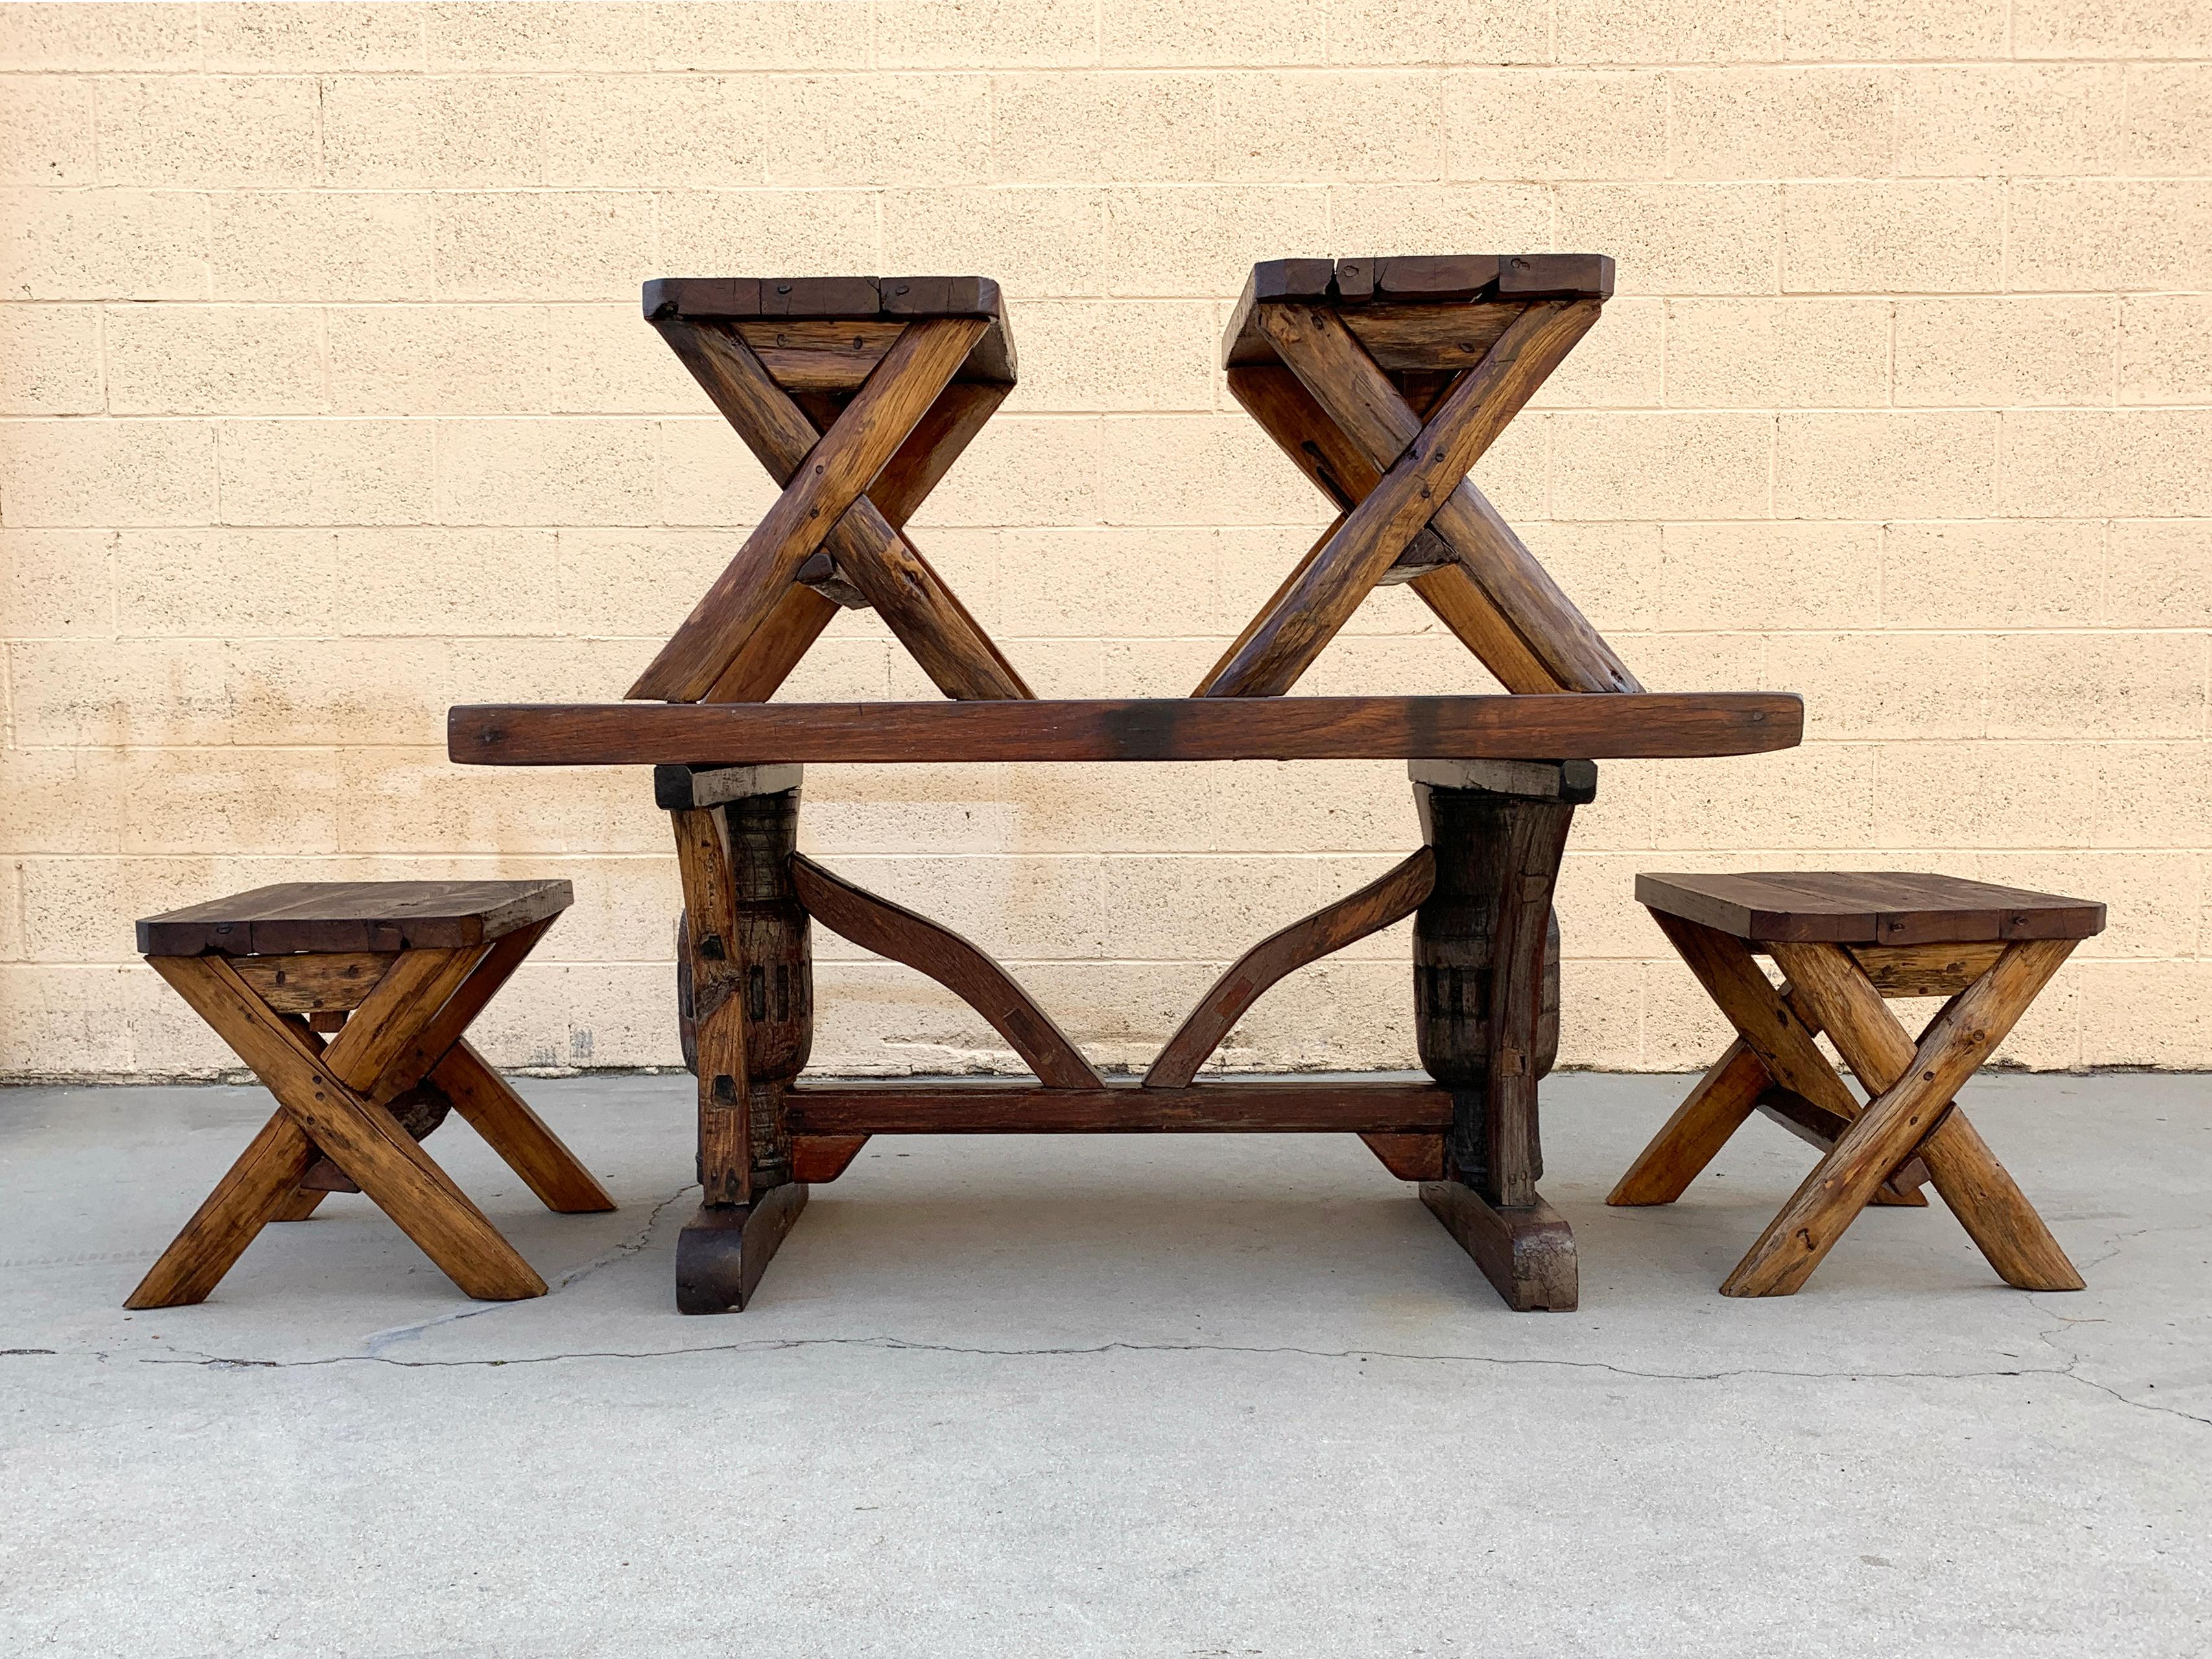 Indonesian teak dining table and bench set, beautifully handcrafted from thick timbers. Ornate design with rustic/ organic Southeast Asian flare. Top is 2